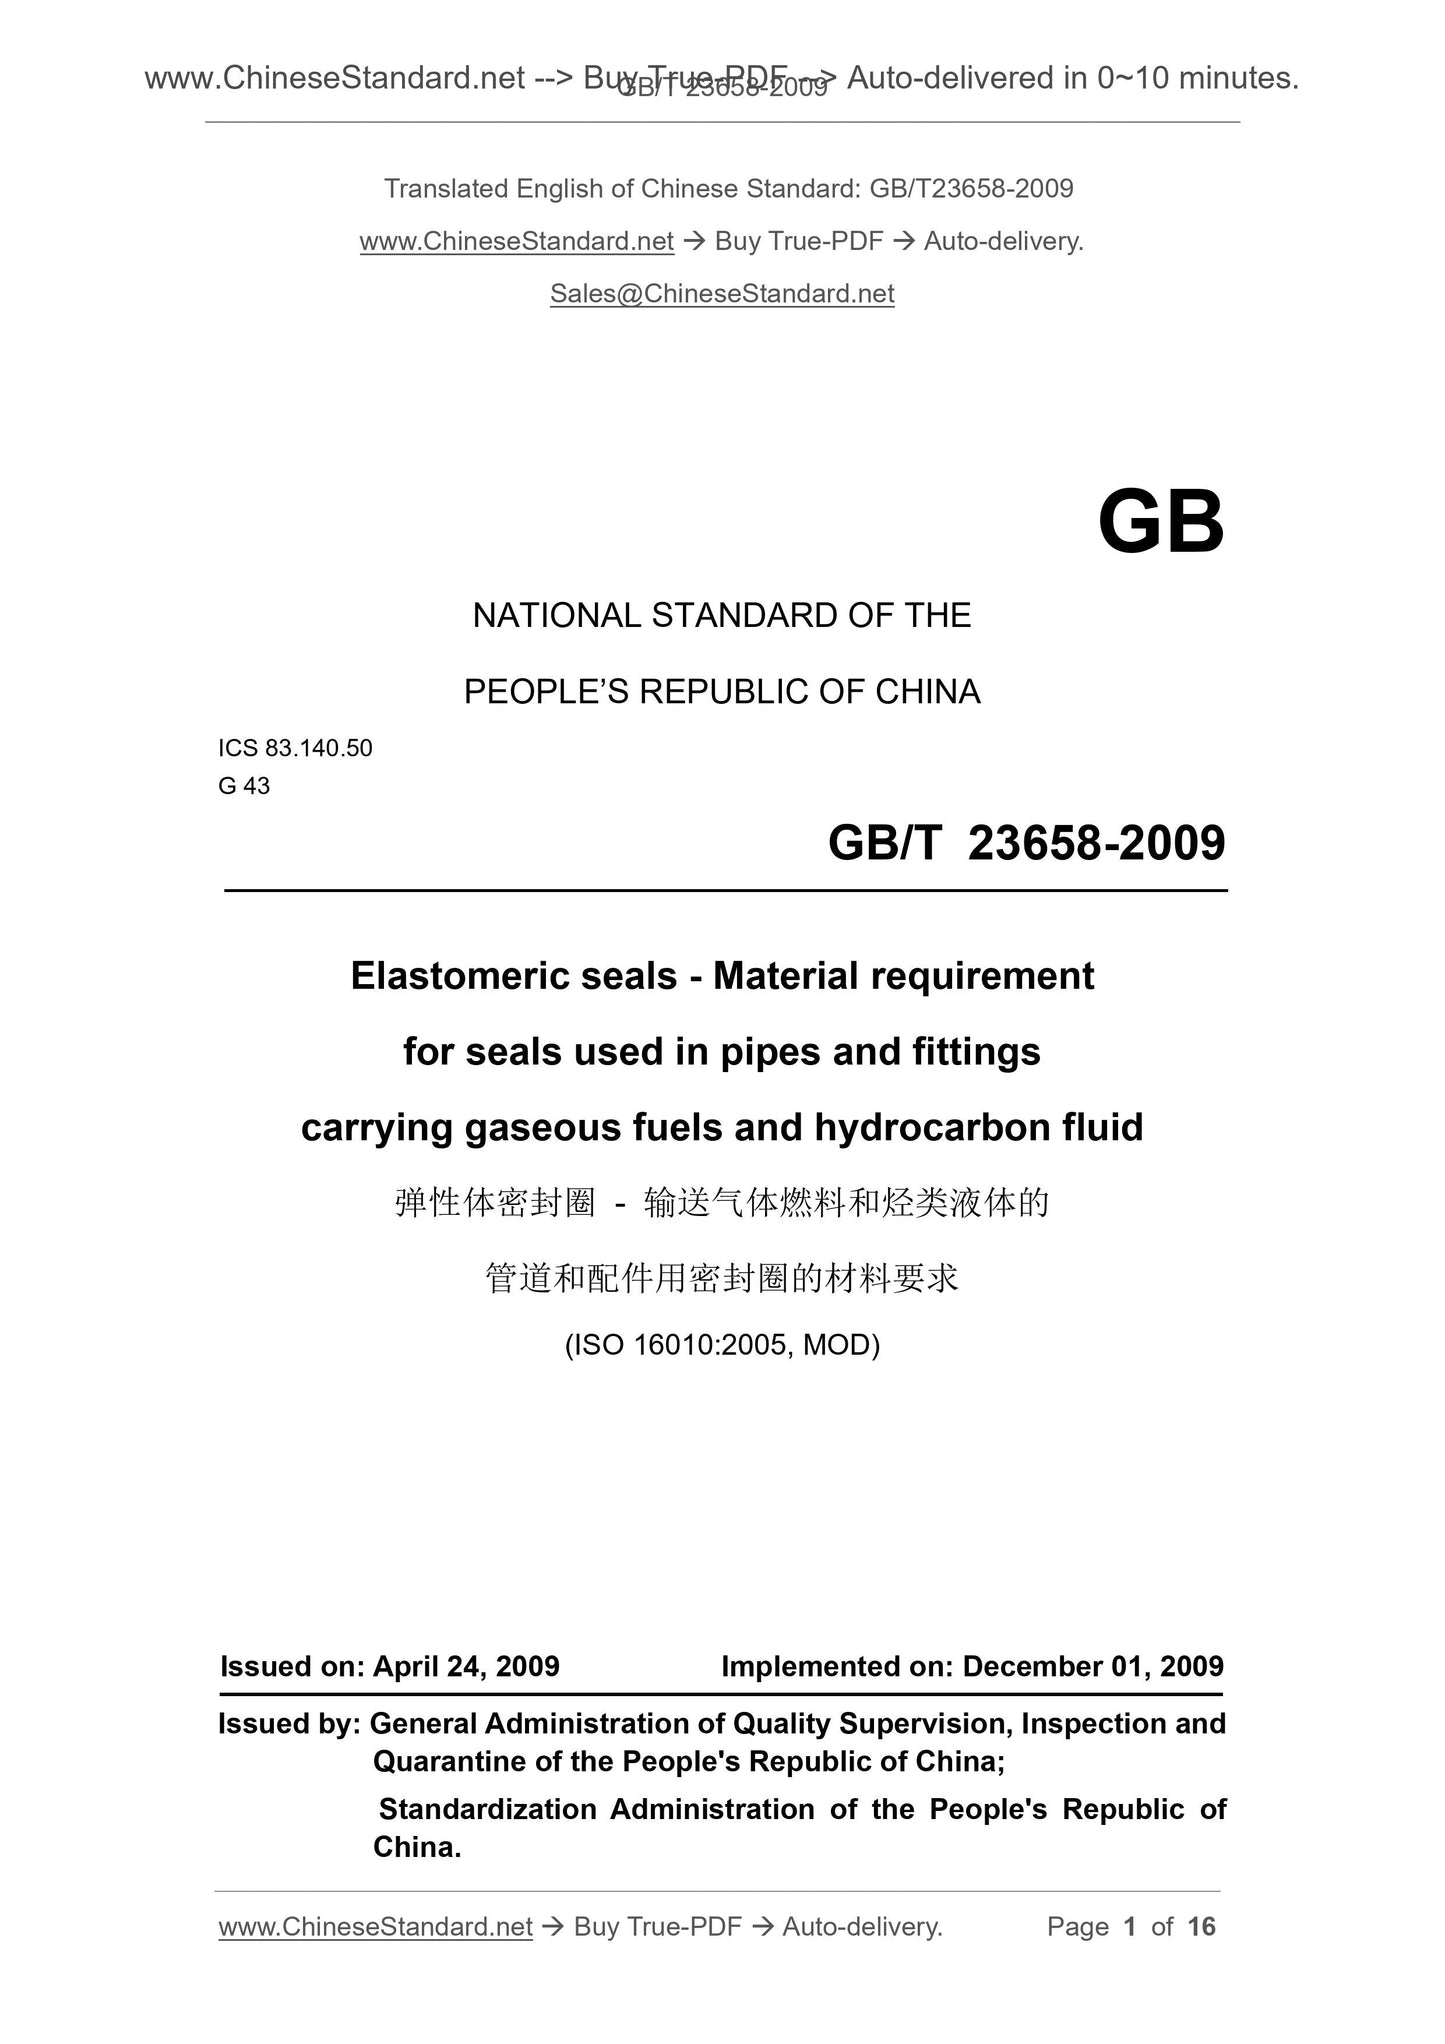 GB/T 23658-2009 Page 1